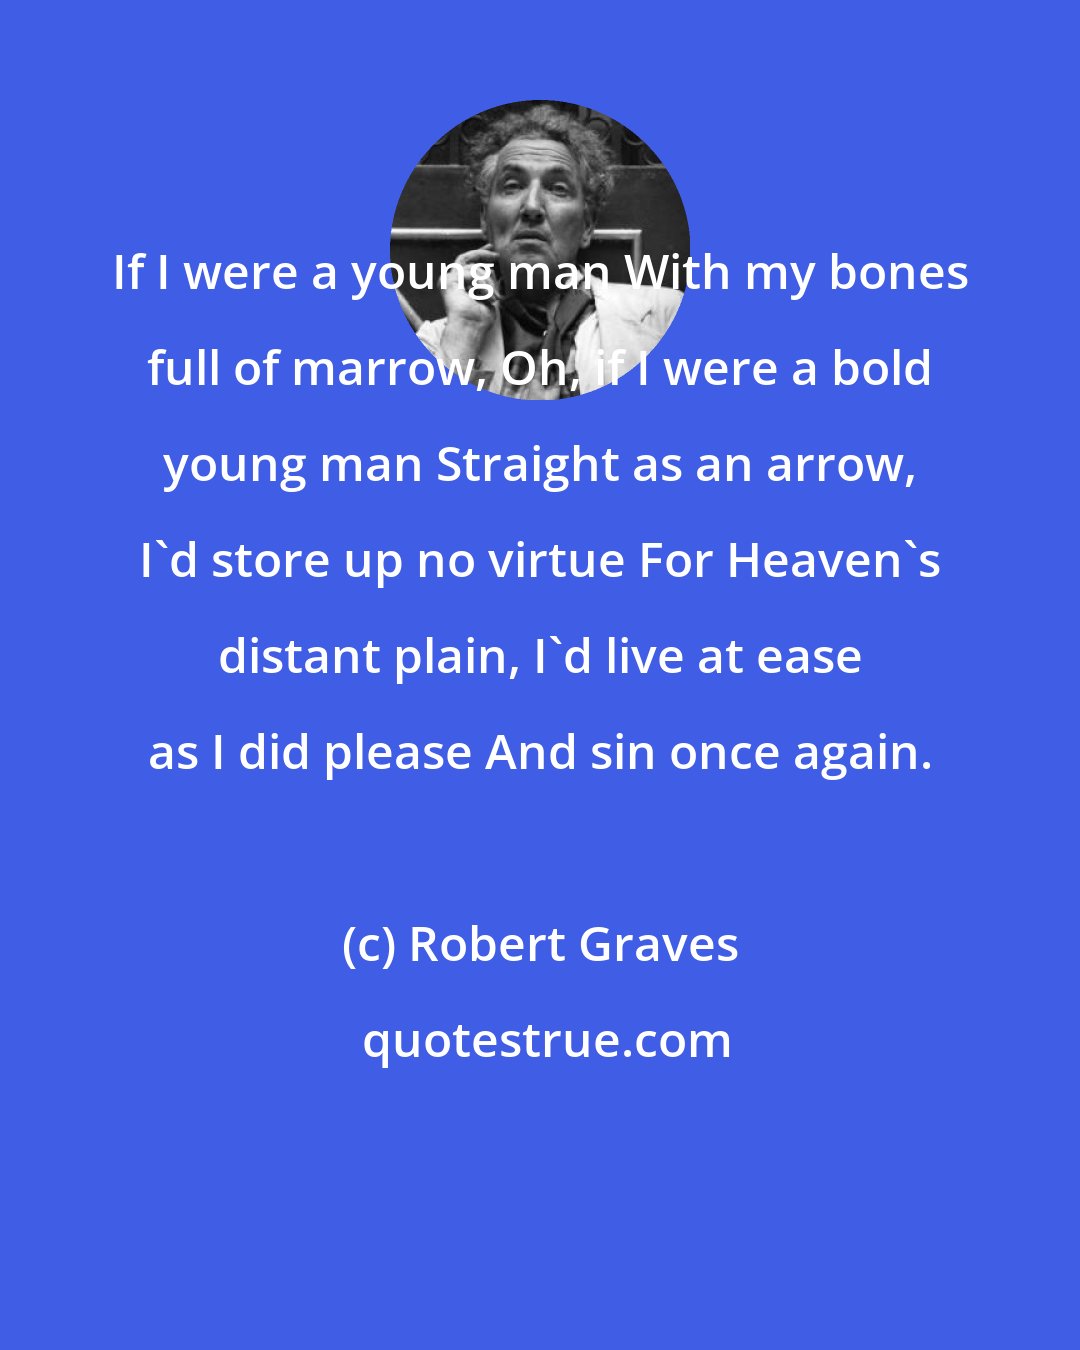 Robert Graves: If I were a young man With my bones full of marrow, Oh, if I were a bold young man Straight as an arrow, I'd store up no virtue For Heaven's distant plain, I'd live at ease as I did please And sin once again.